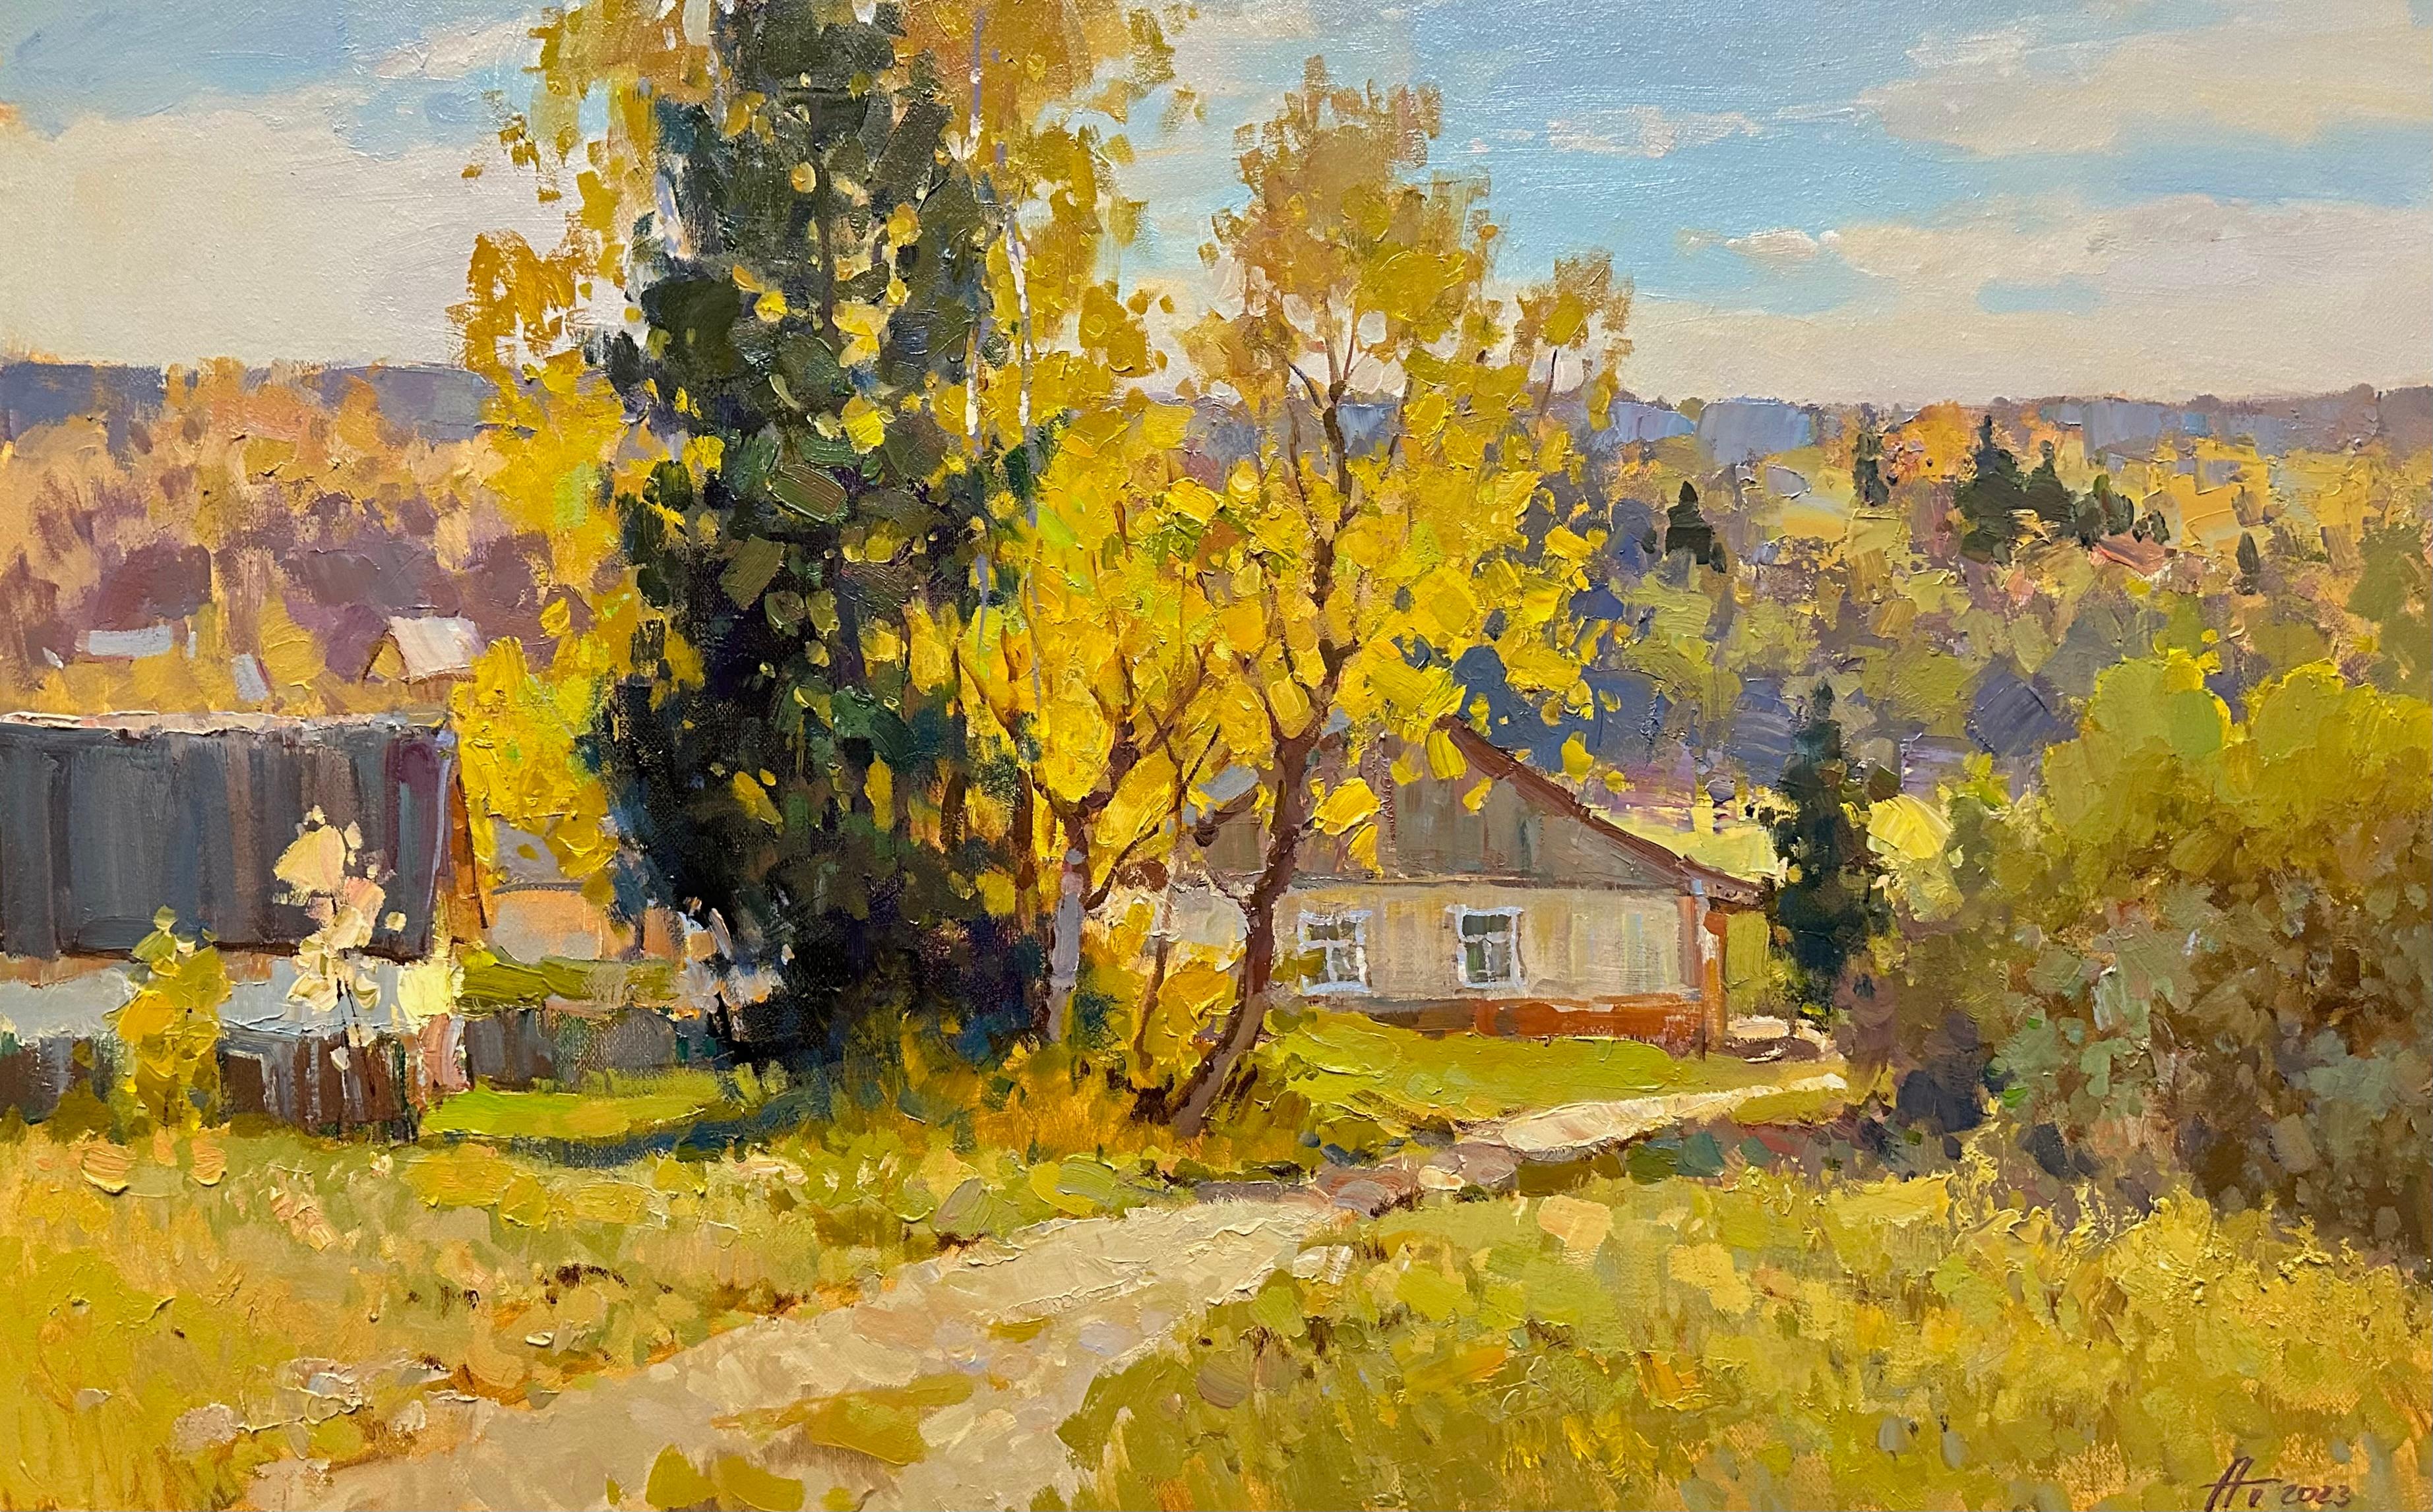 "Summer Morning" is a painting that depicts a sunrise over a picturesque rural landscape. The first rays of the sun penetrate through the trees and touch the fresh greenery, creating an atmosphere of a new day beginning.
The color palette includes